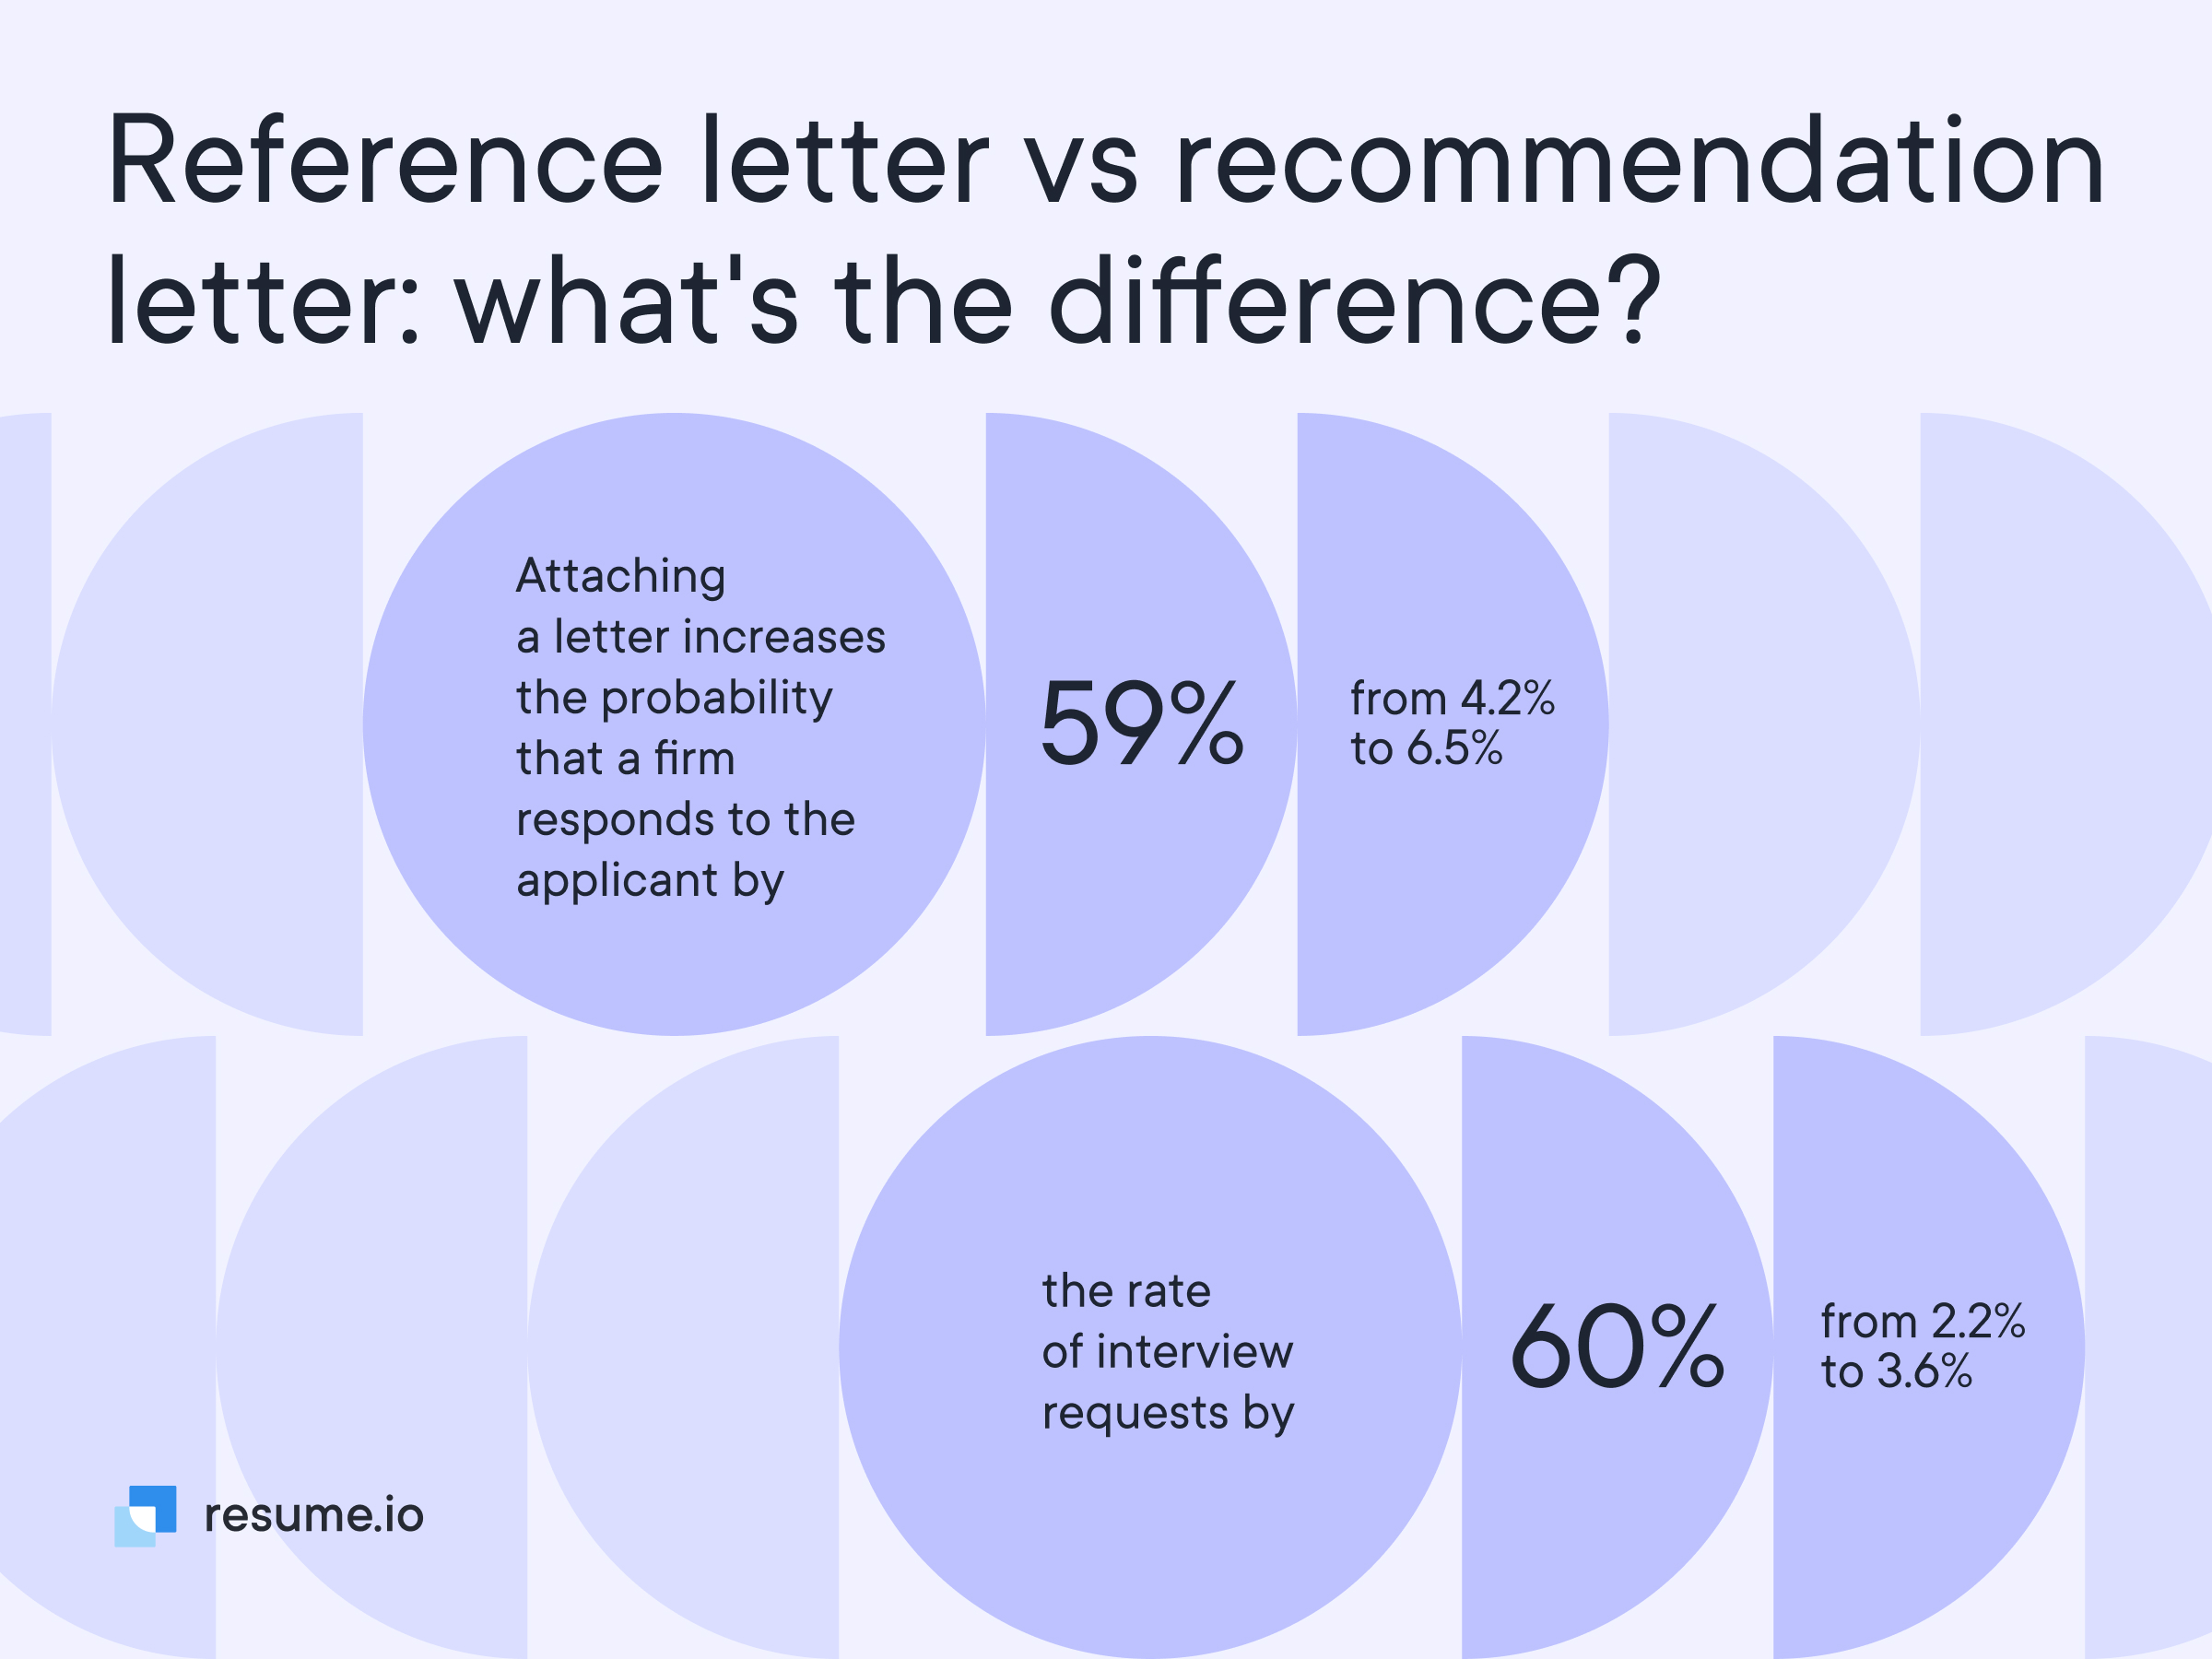 Statistical facts between the differences of a reference letter vs a recommendation letter